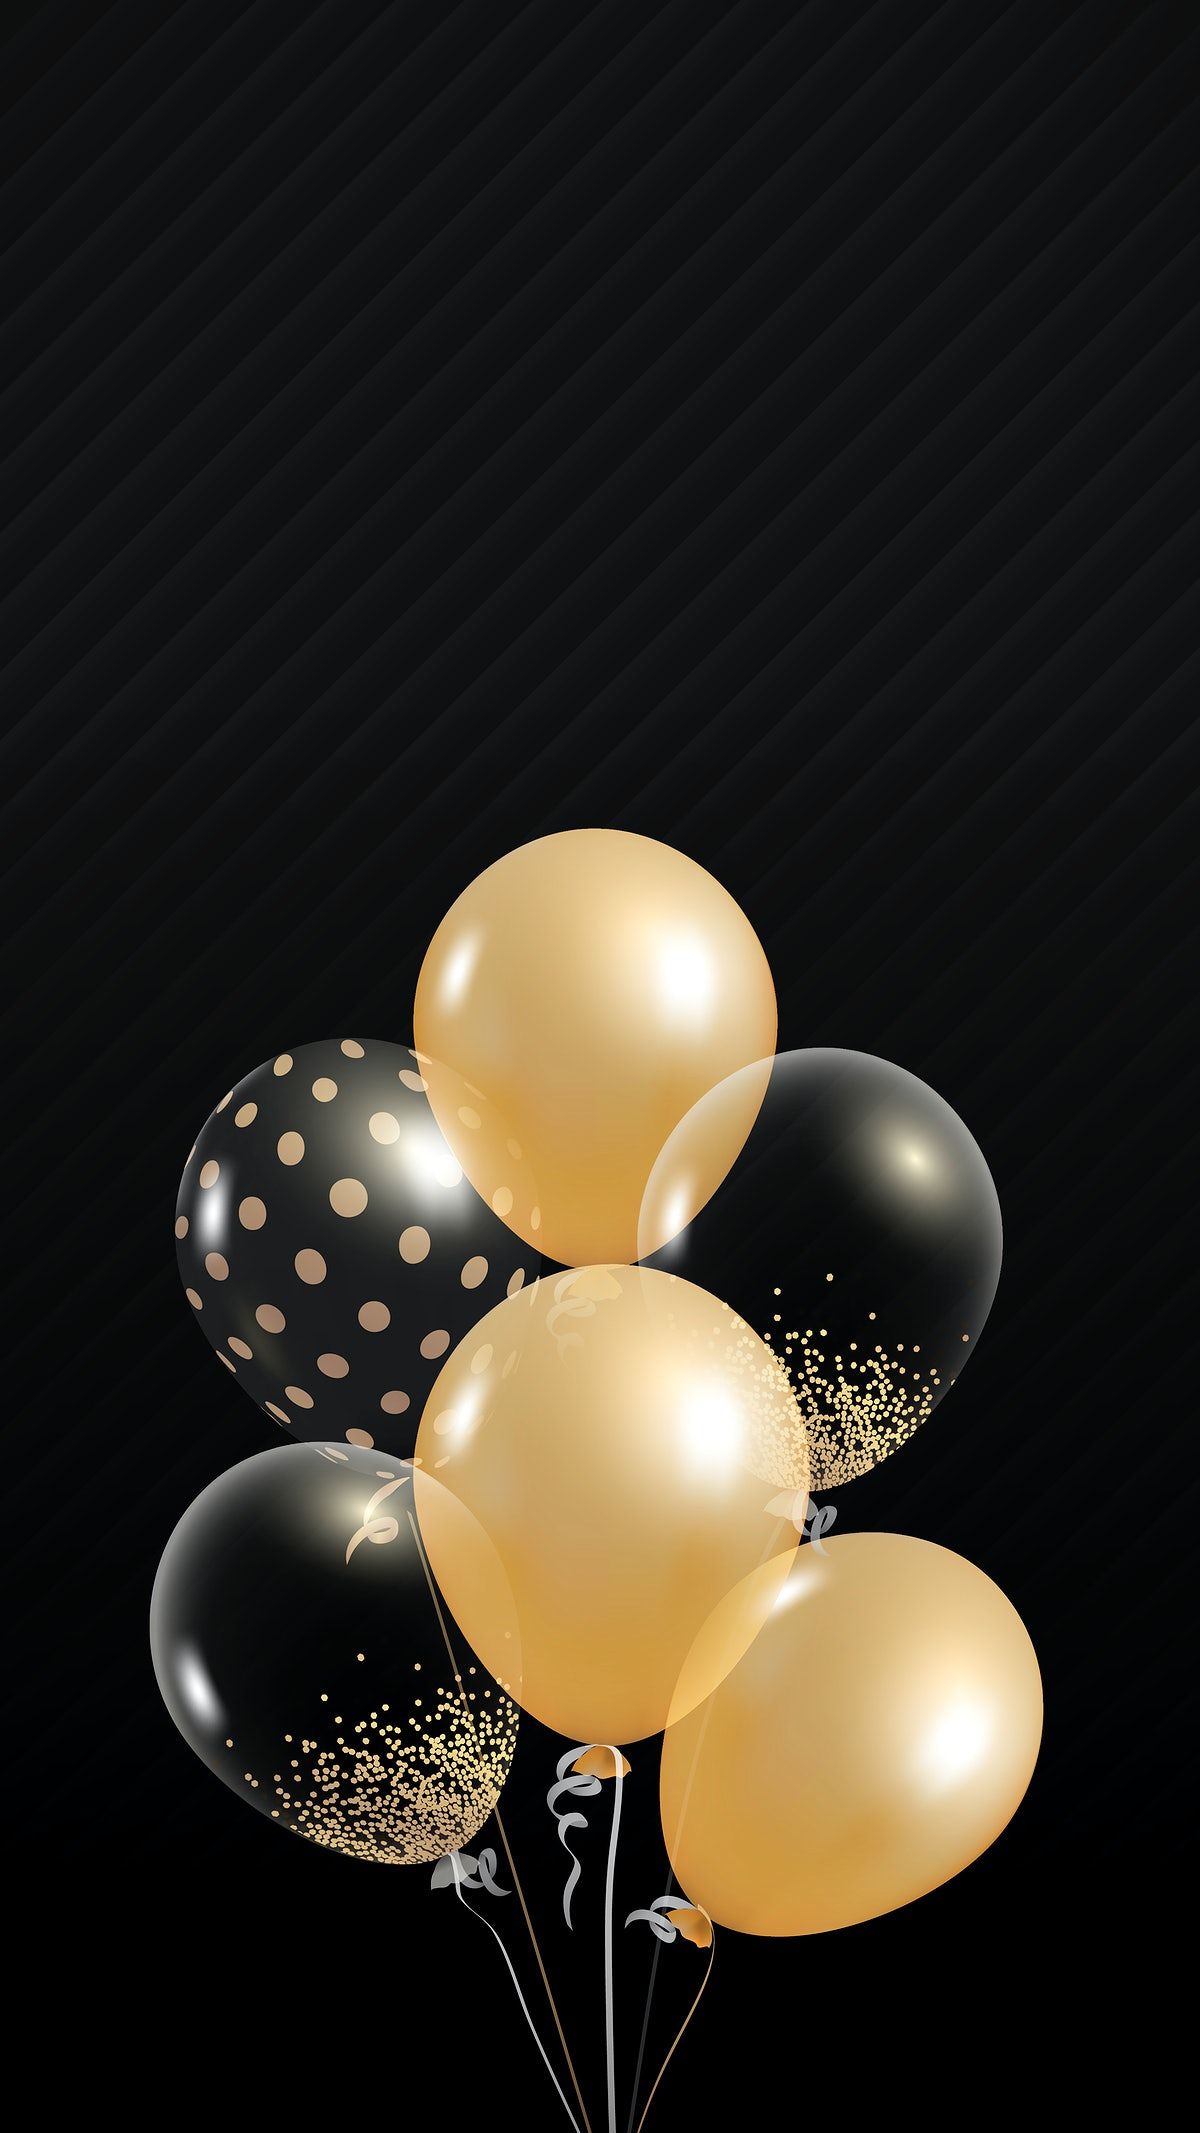 Black and Gold Balloons Wallpaper Free Black and Gold Balloons Background